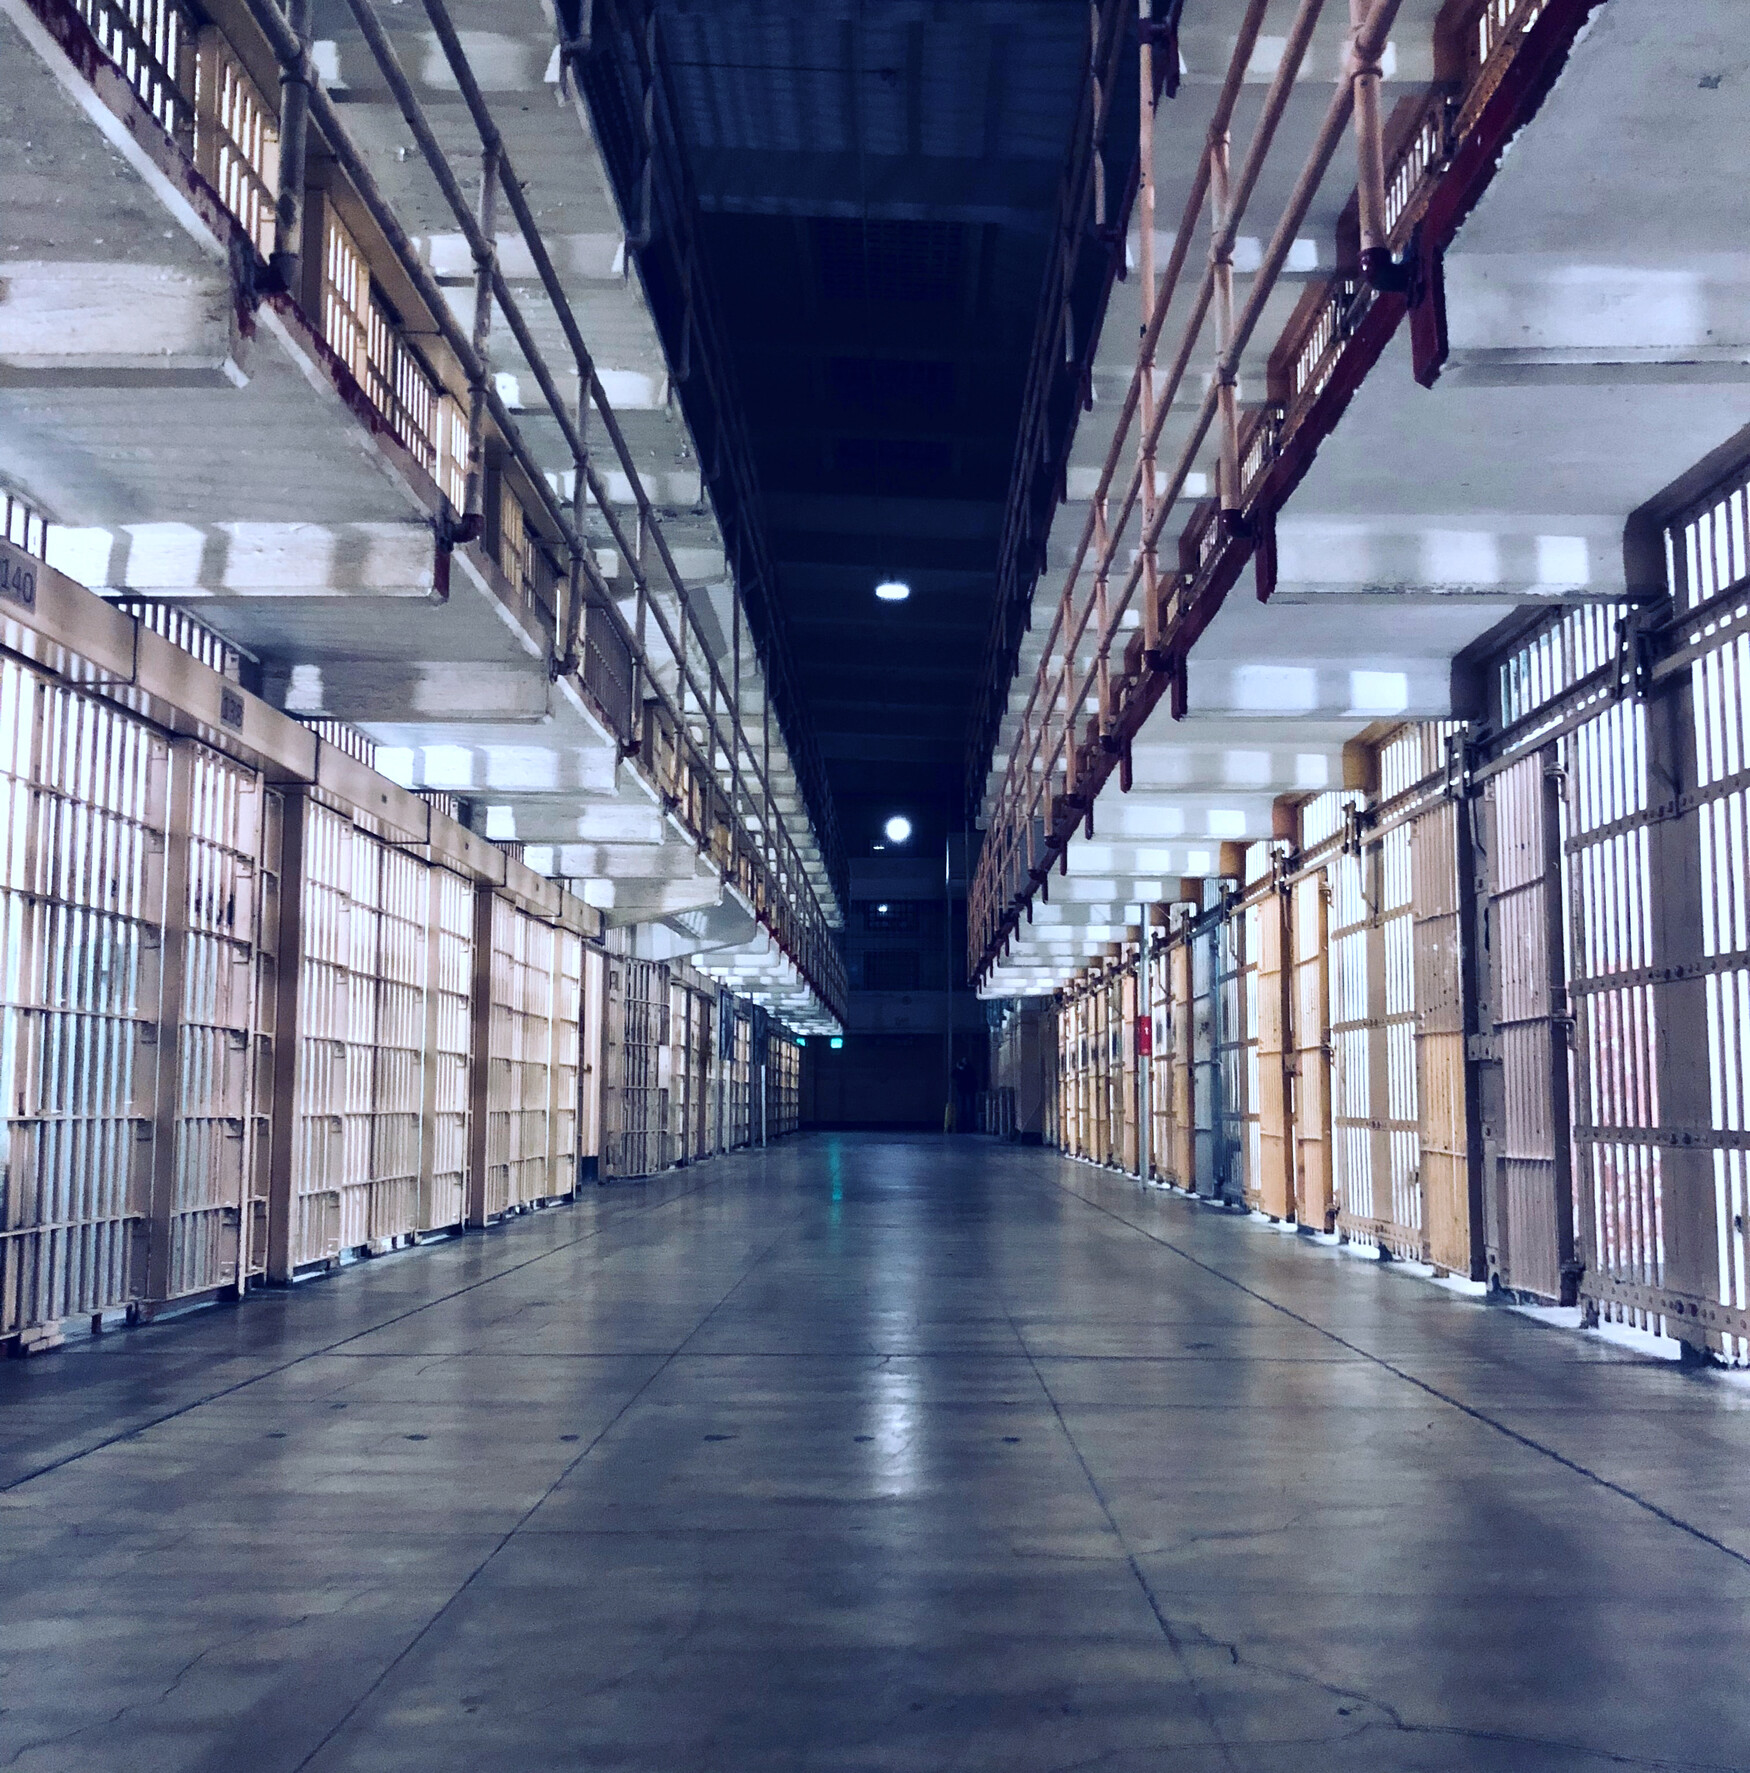 The hallway of an empty prison